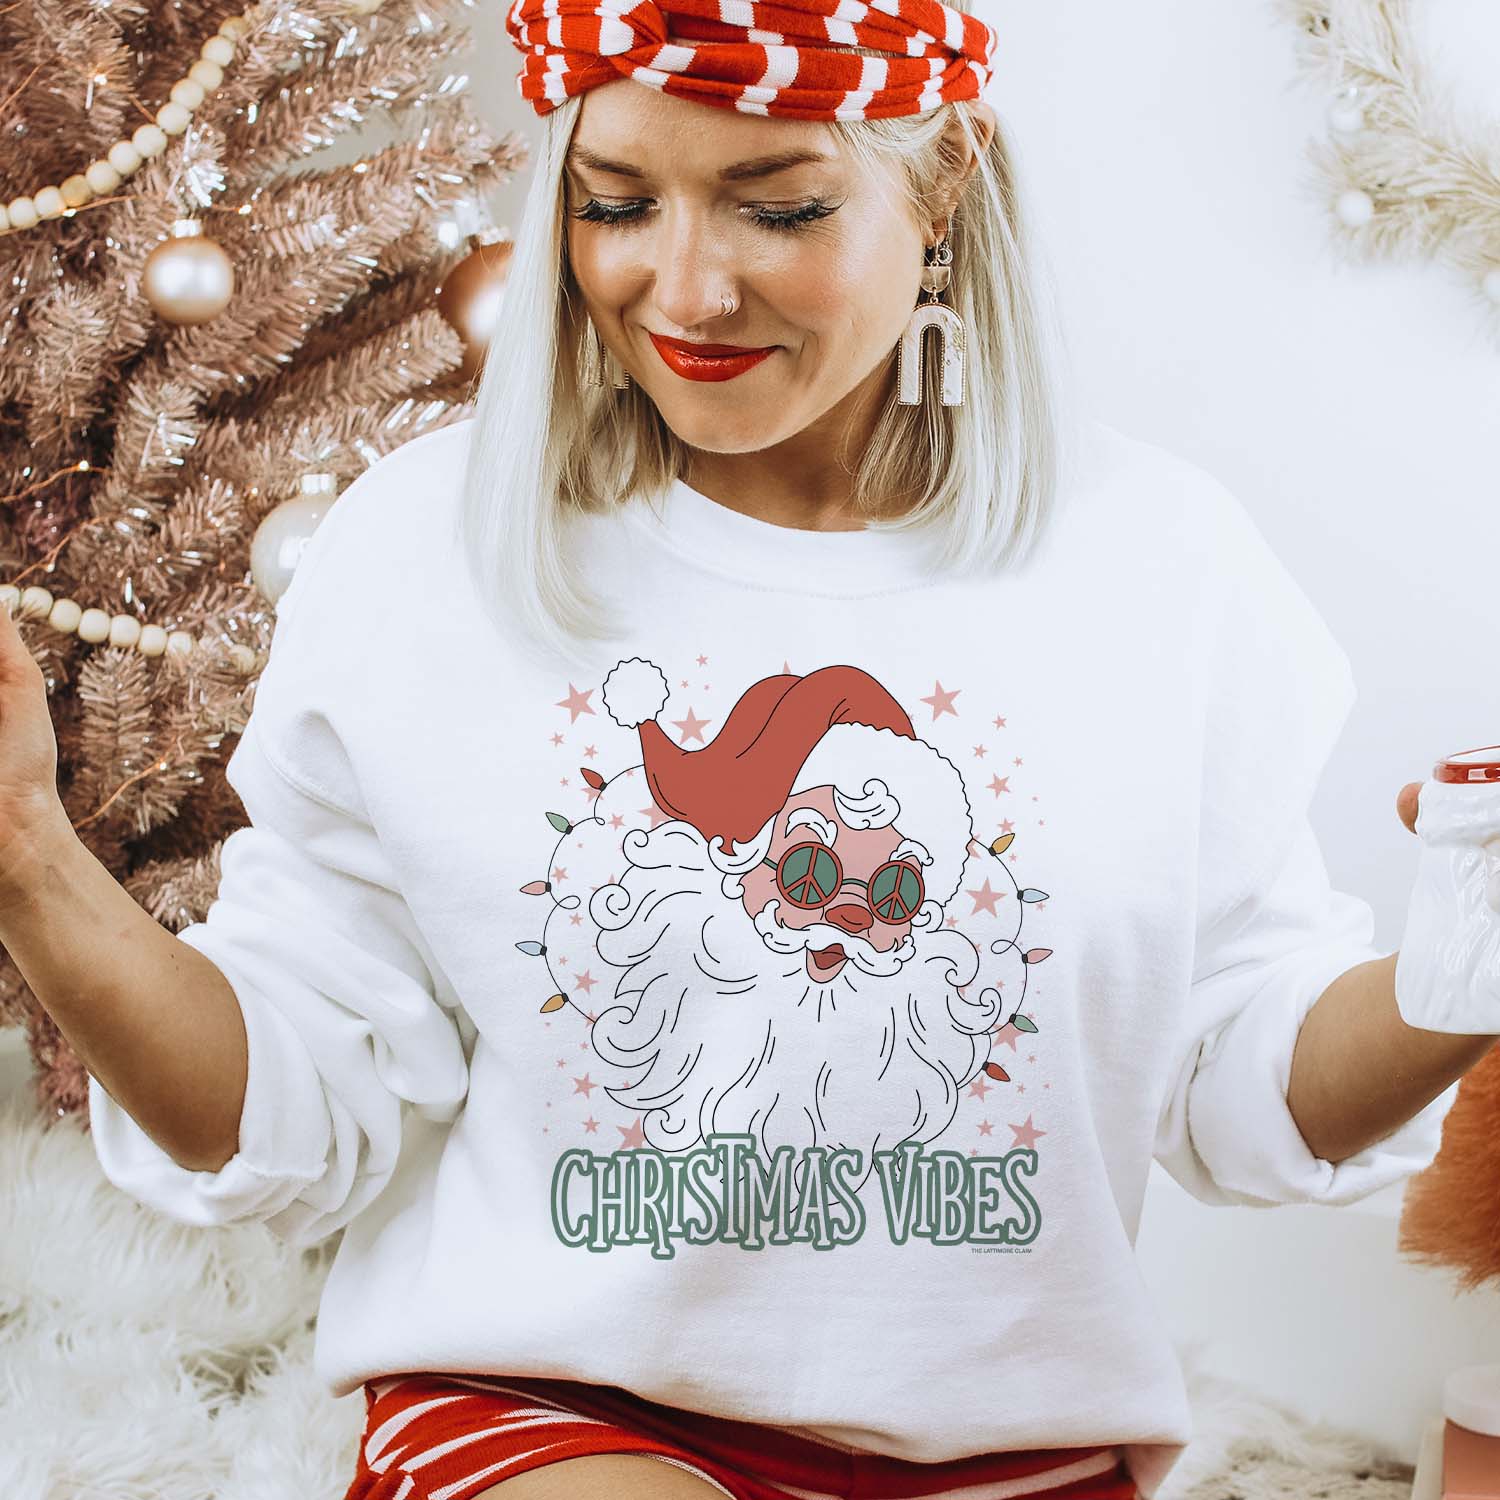 This white crew neckline graphic sweatshirt graphic has a hand drawn Santa Clause wearing a hat and groovy peace sign glasses. Pink stars of various sizes are all around him, as well as bright string lights on either side of his beard. At the bottom of his beard are the words "Christmas Vibes" in a fun font outlined in green. The model is sitting in front of a white background with a brown Christmas tree behind her right shoulder.